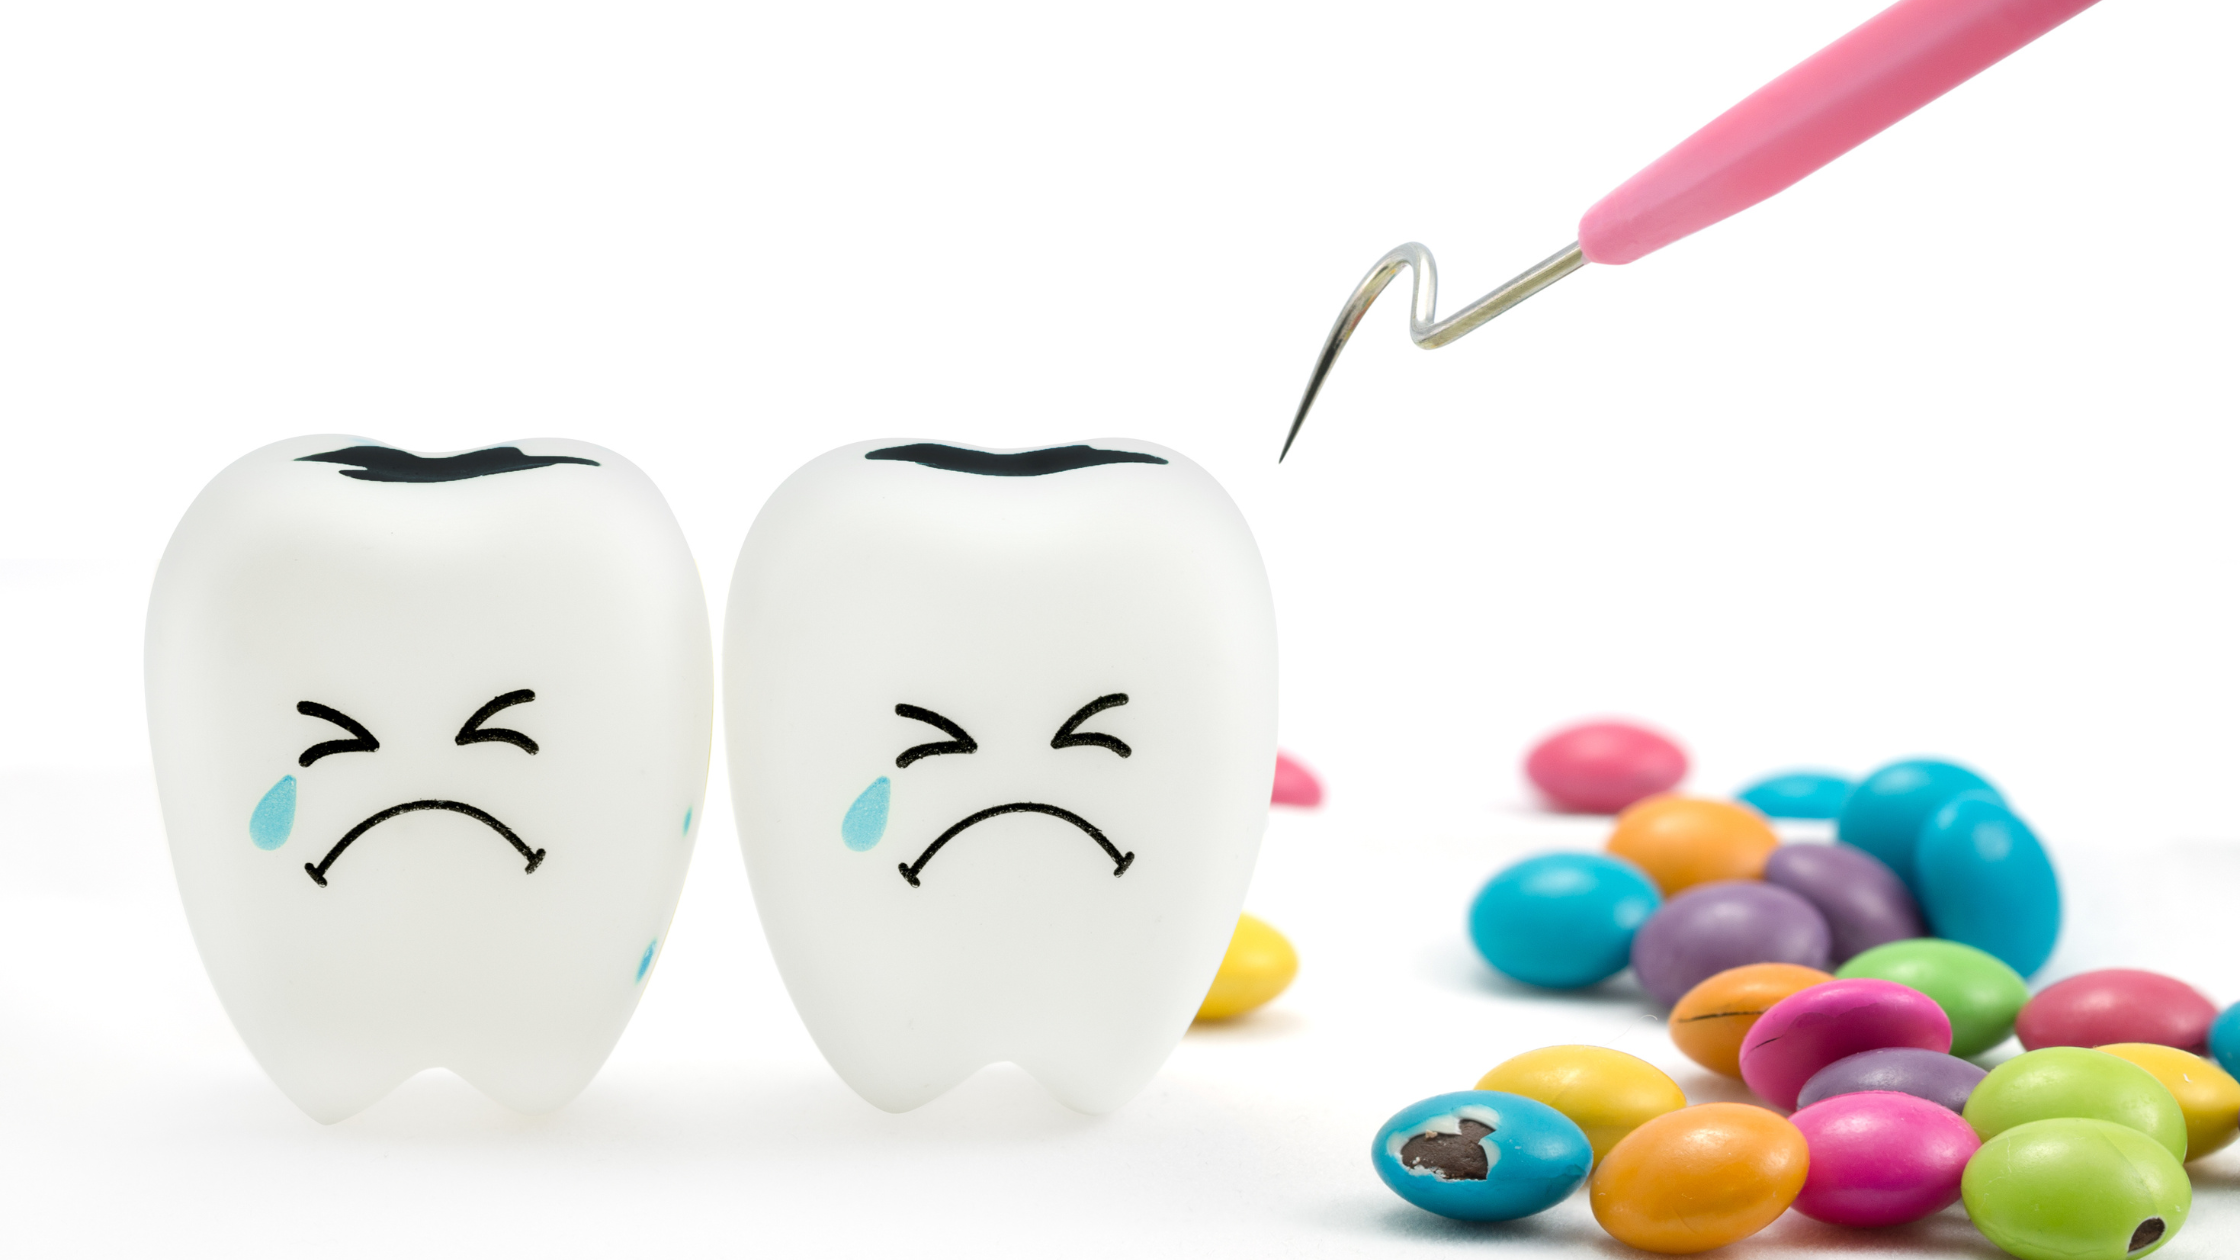 two animated human molars with sad faces cower from a dental tool, colorful chocolate candy sits beside them